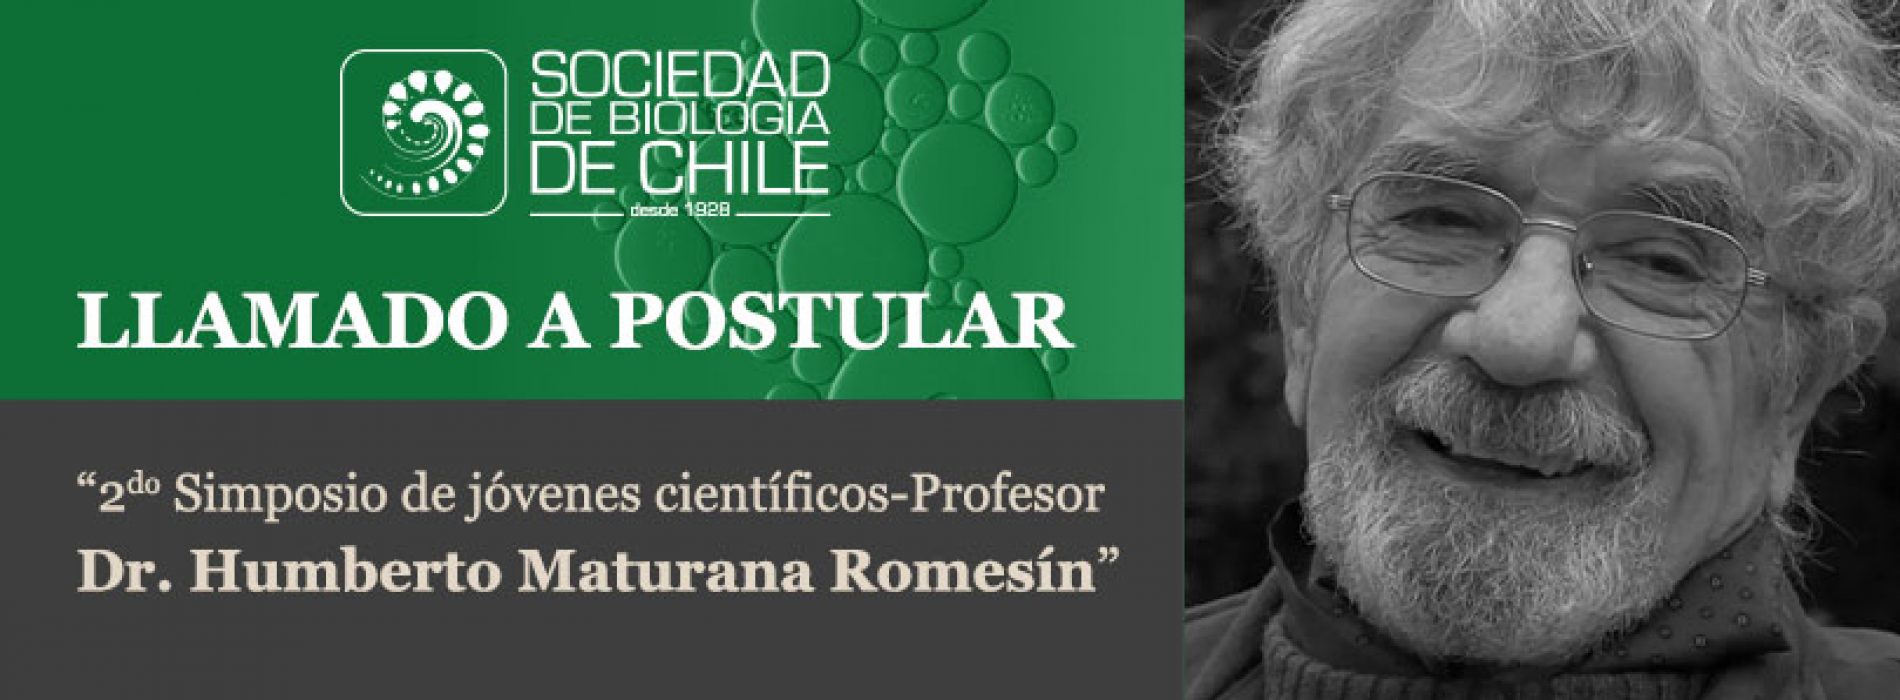 Call to apply "2nd Symposium of young scientists-Professor Dr. Humberto Maturana Romesín"